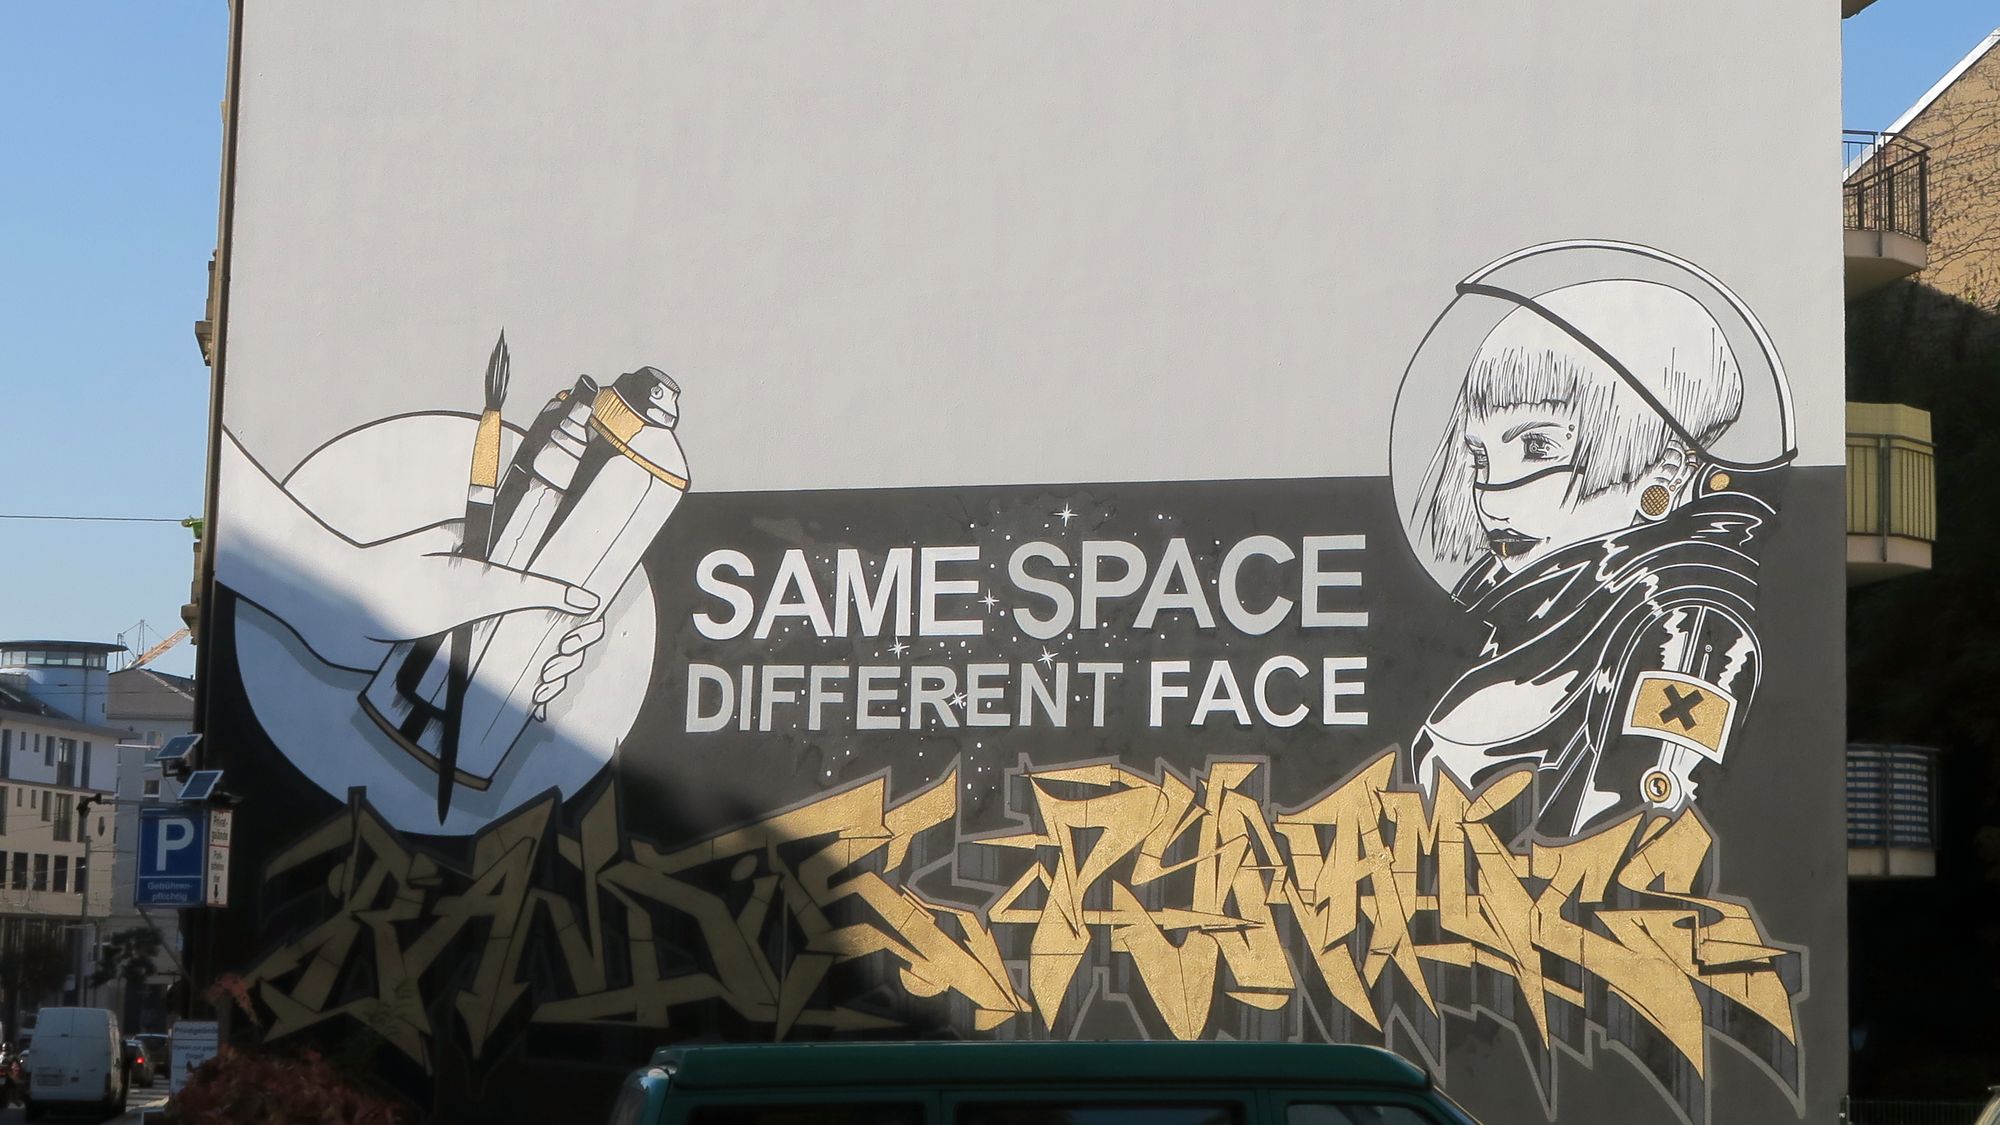 Same space - different face